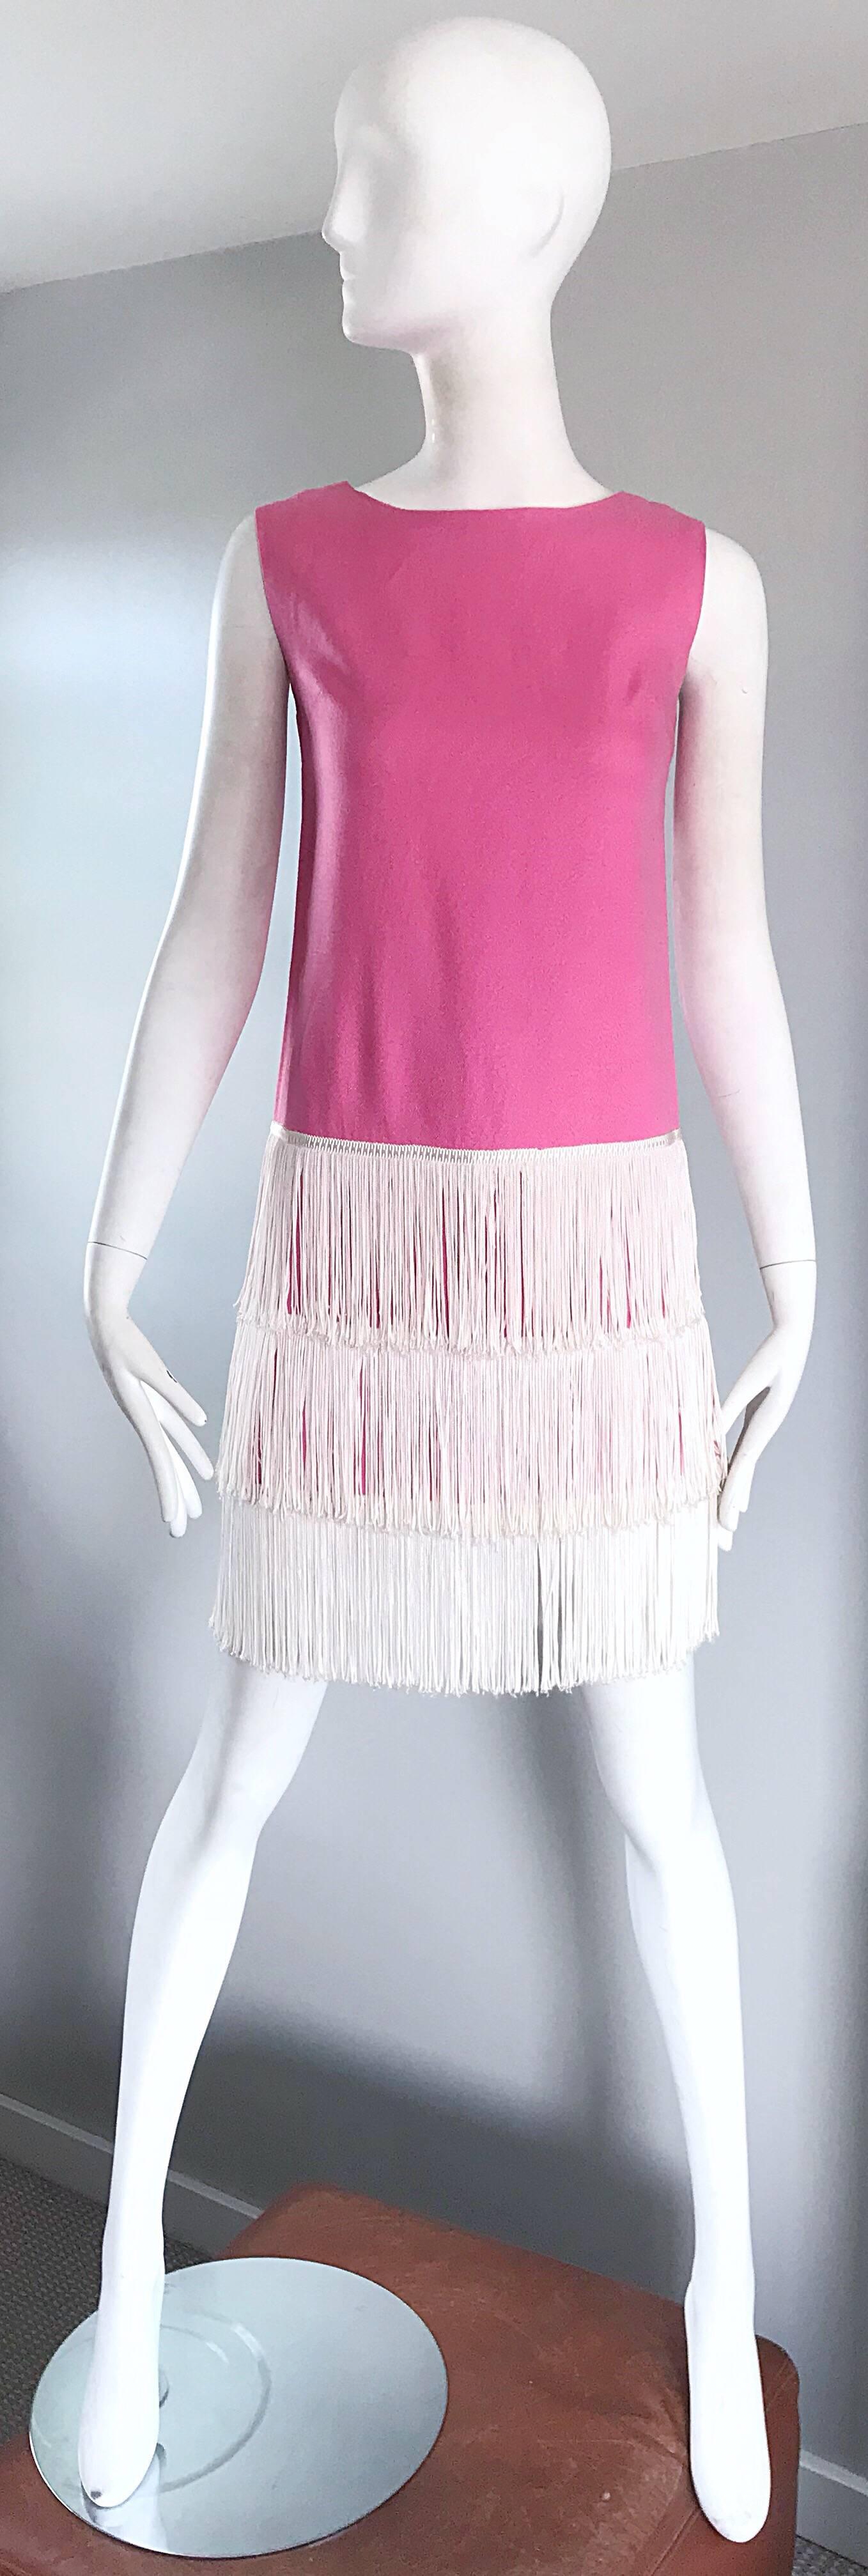 Amazing 60s does 20 bubblegum pink and white sleeveless flapper style fringed flapper style shift dress! Soft textured cotton, with three tiers of white fringe at the hem. Full metal zipper up the back with hook-and-eye closure. Very well made, with